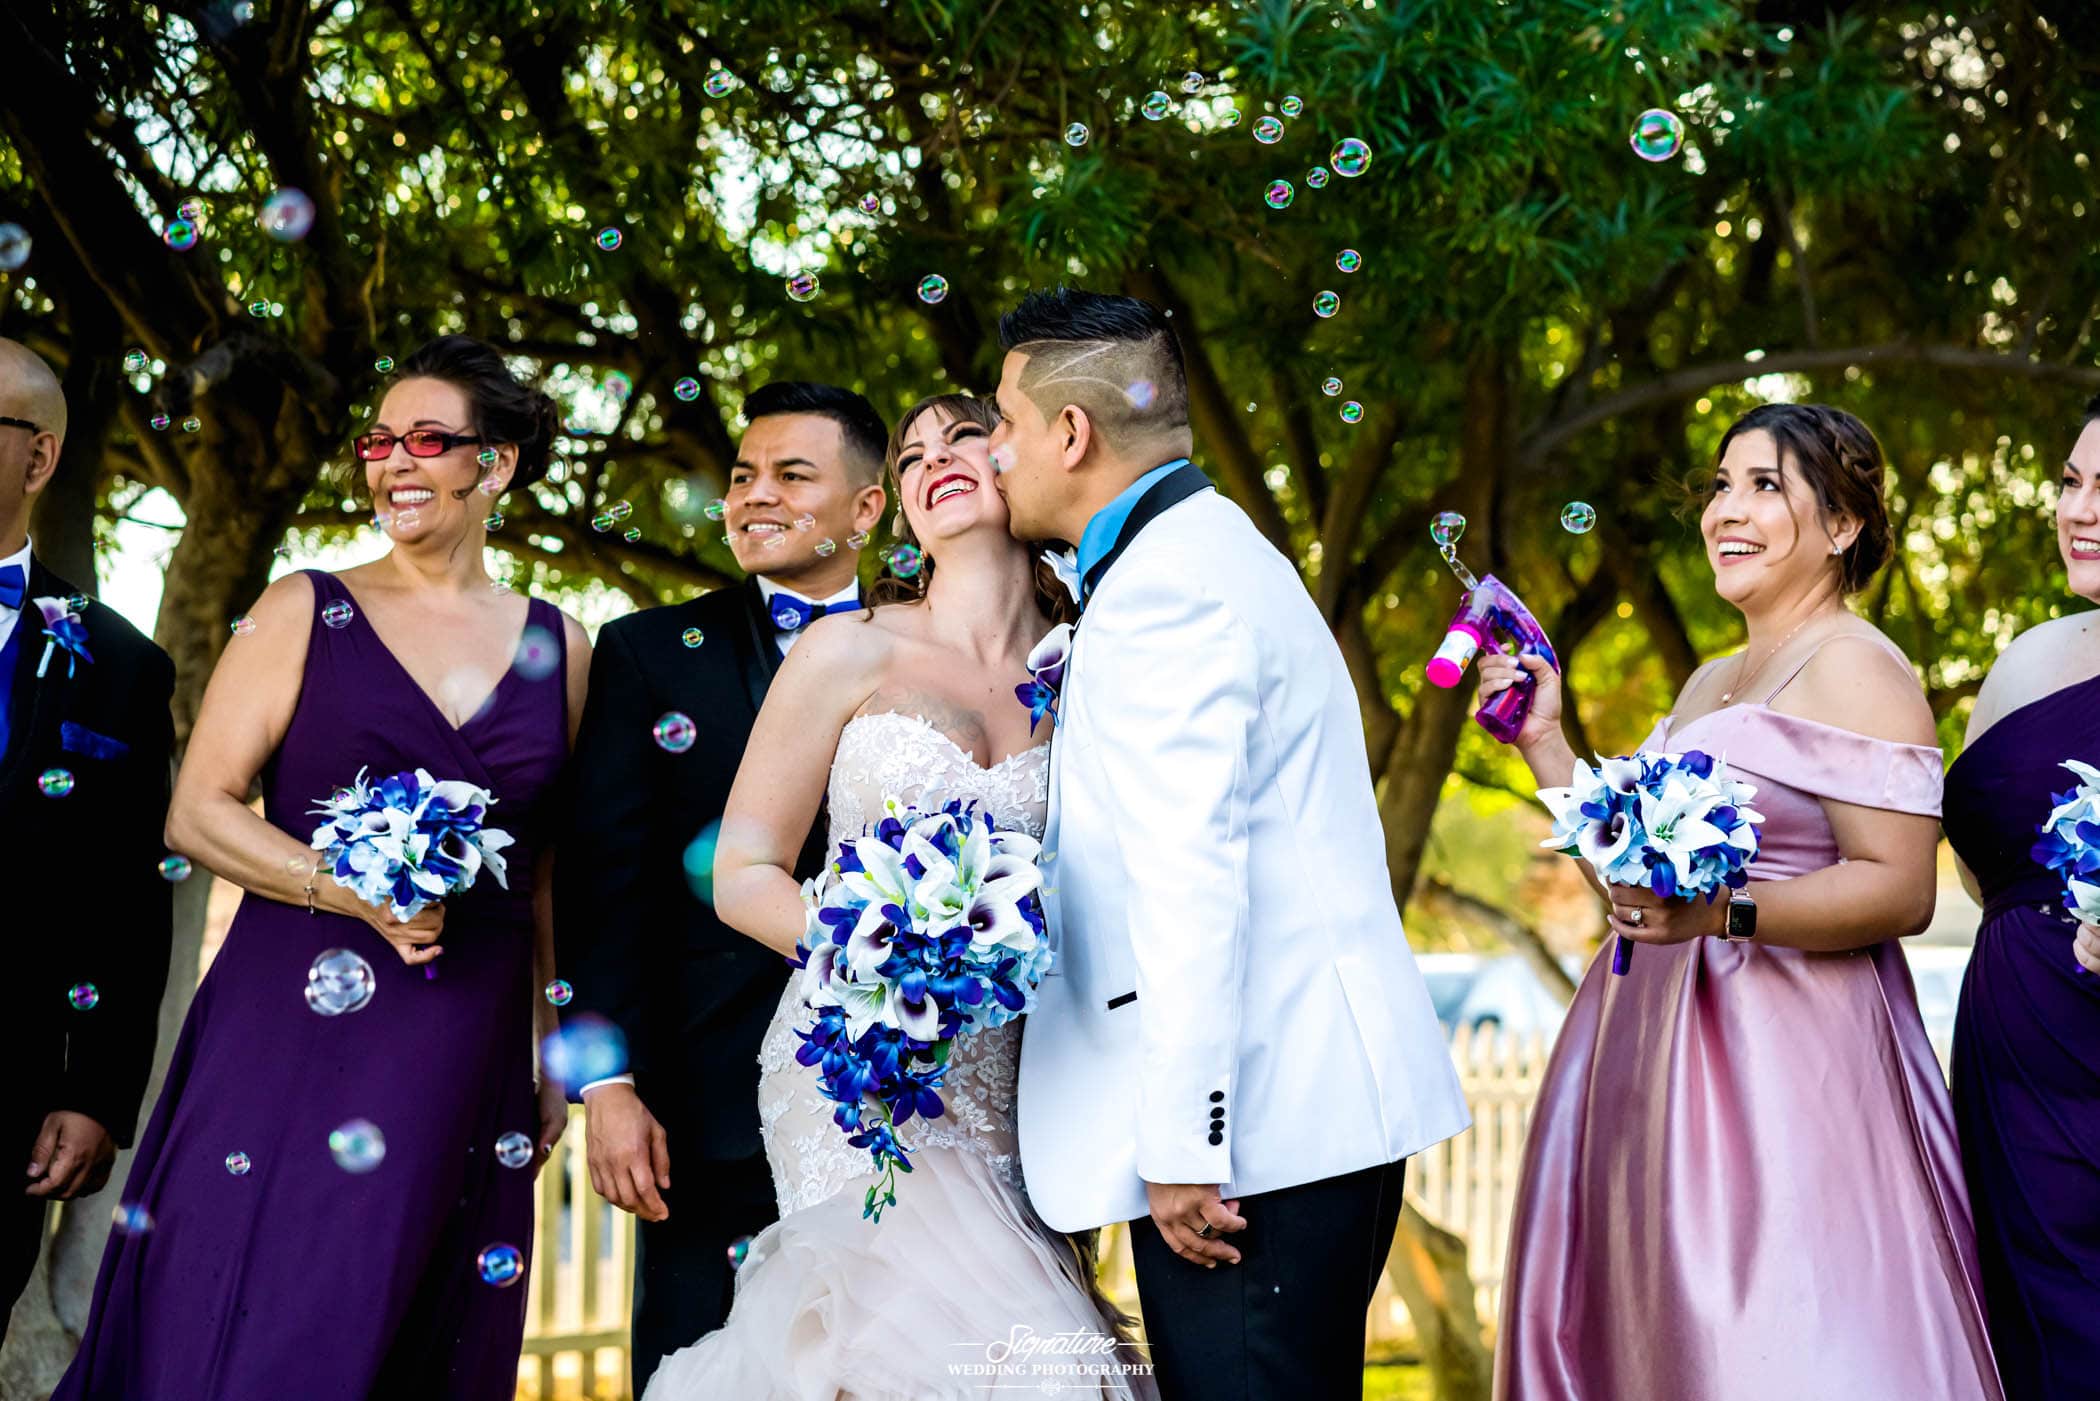 Groom kissing bride on cheek with wedding party and bubbles